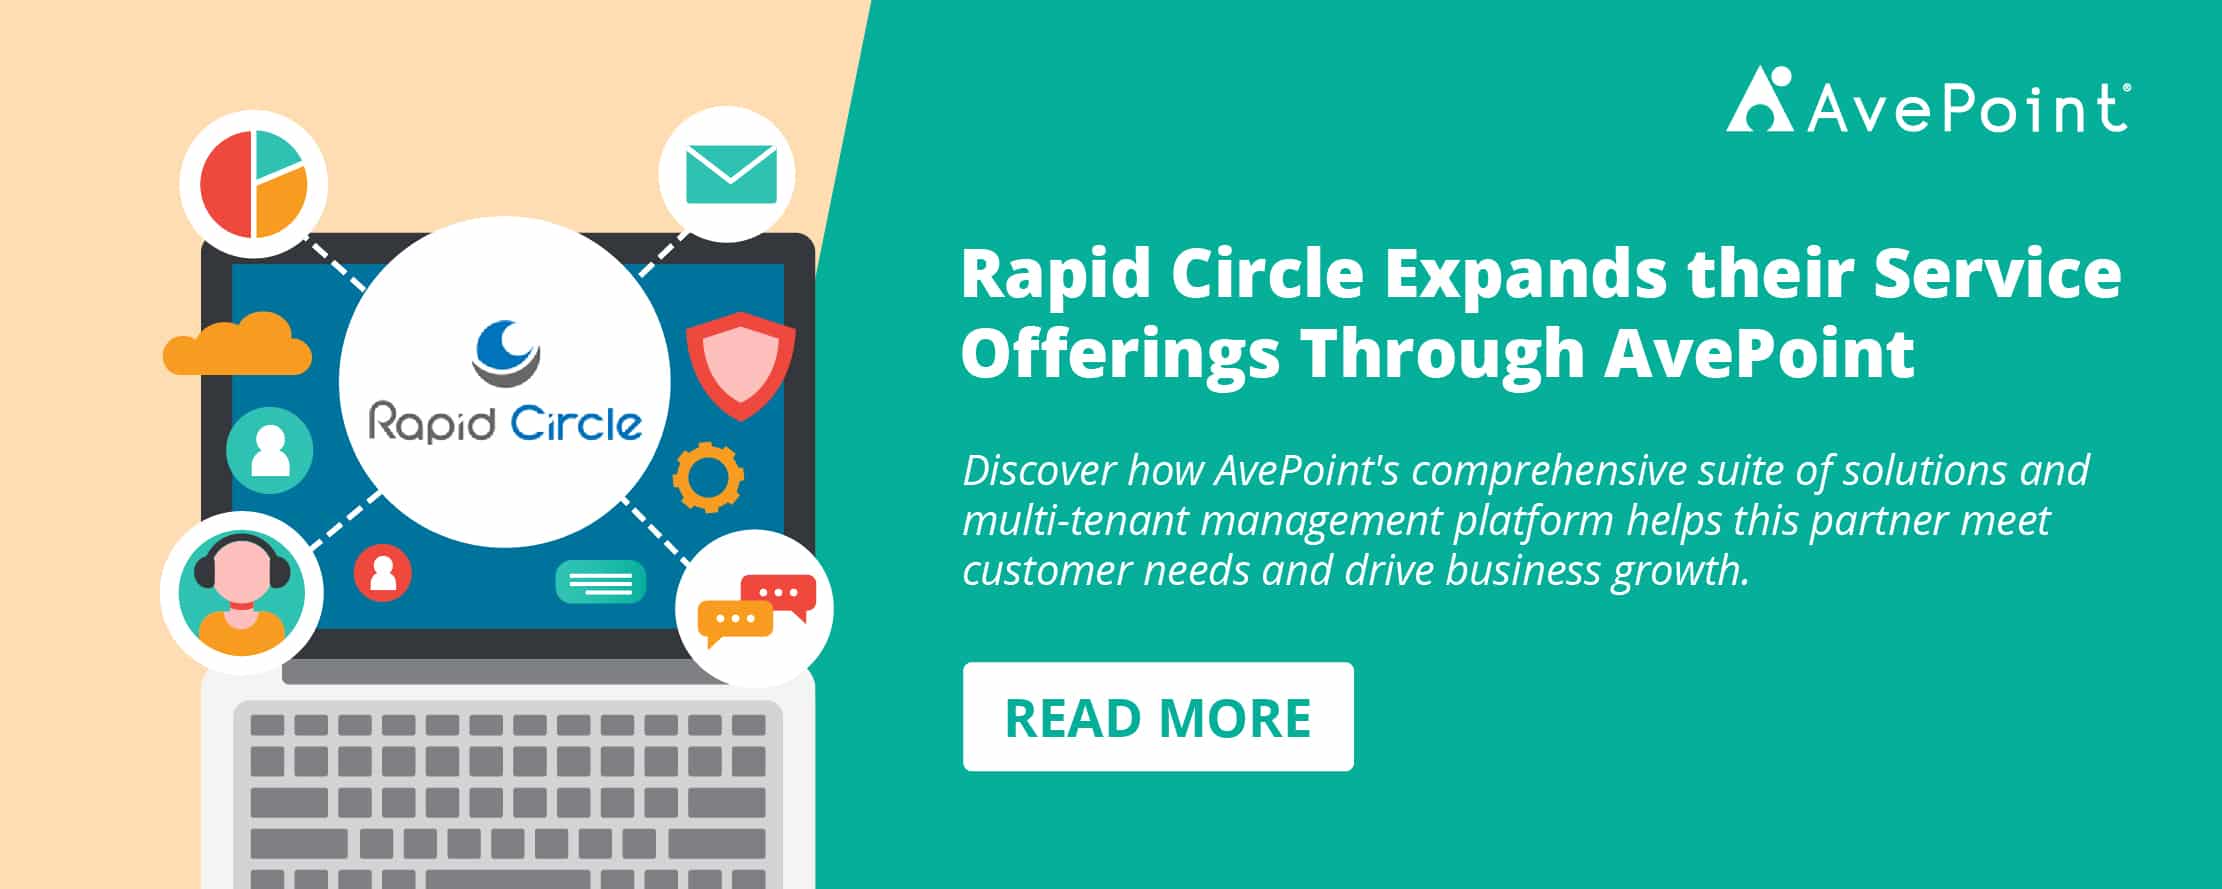 Rapid-Circle-Expands-their-Service-Offerings-ThroughAvePoint-SaaS-management